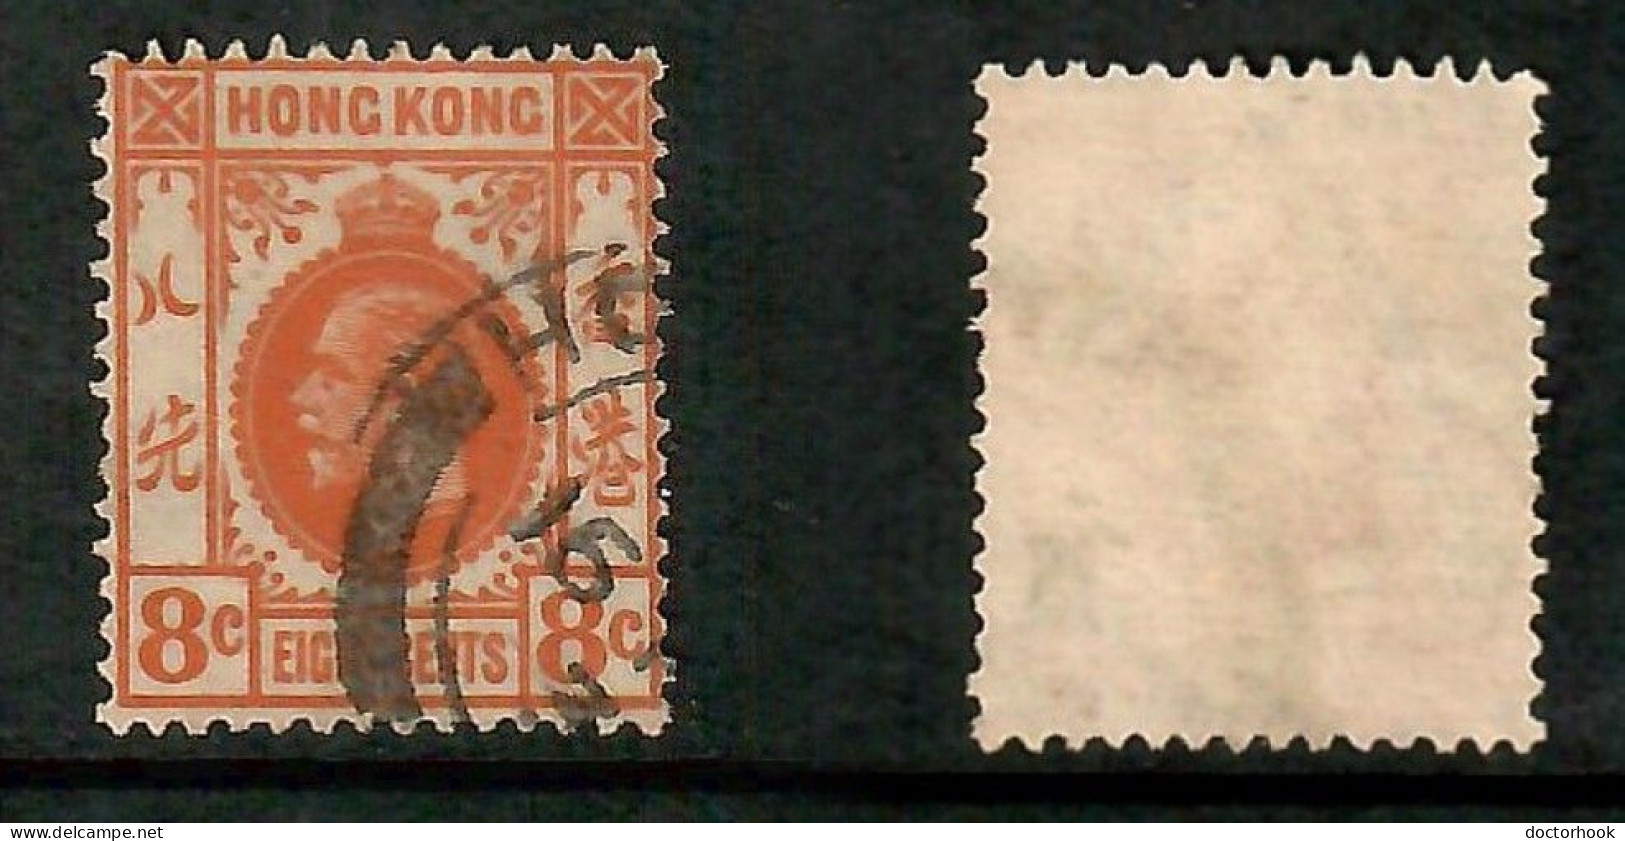 HONG KONG   Scott # 136 USED (CONDITION AS PER SCAN) (Stamp Scan # 991-11) - Usati